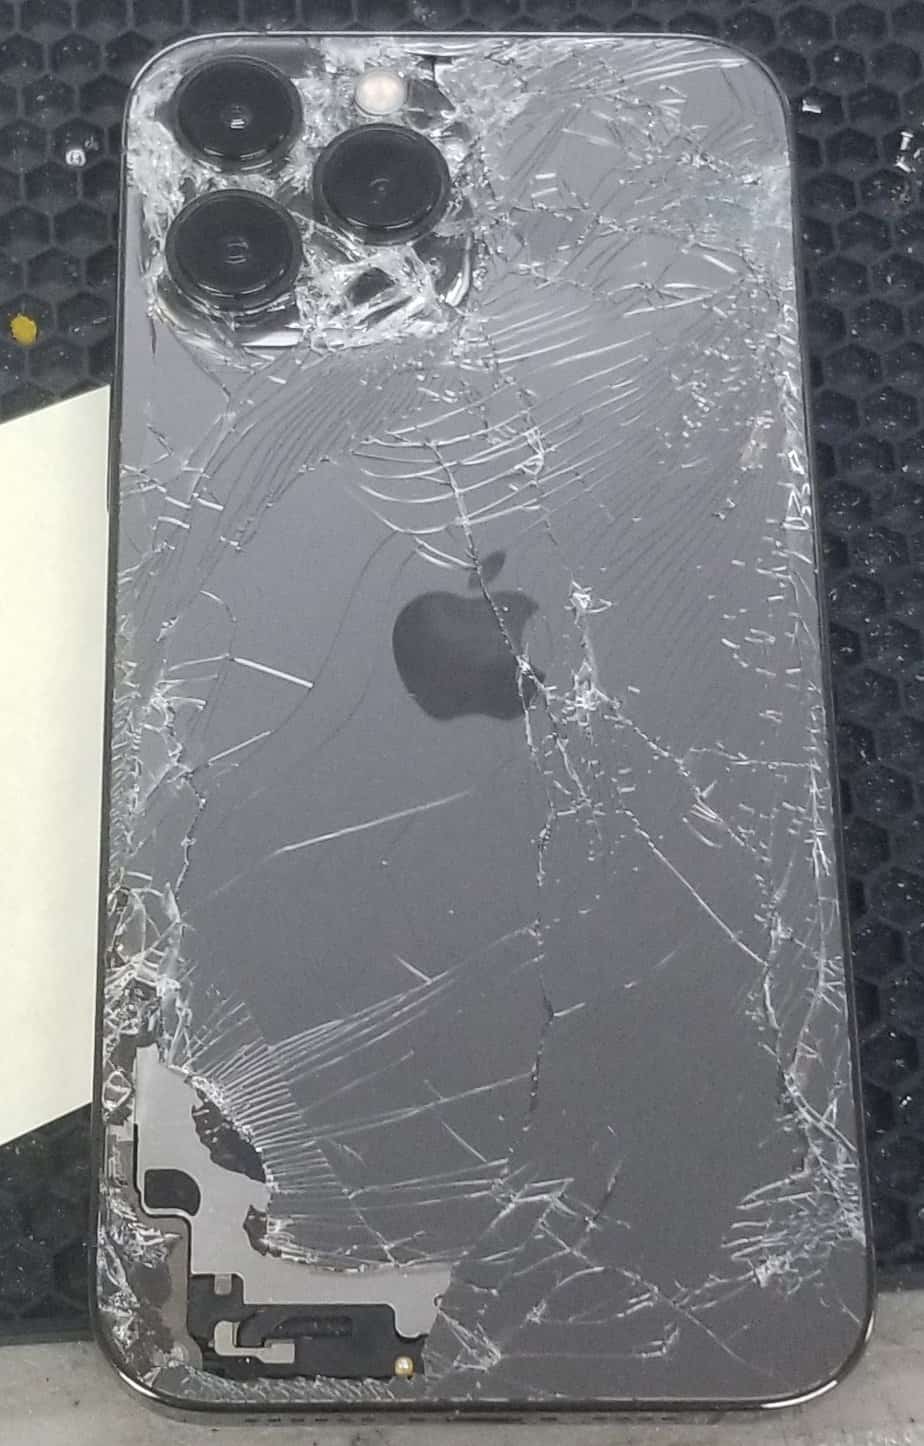 iPhone Back Glass Repair, #1 in NYC